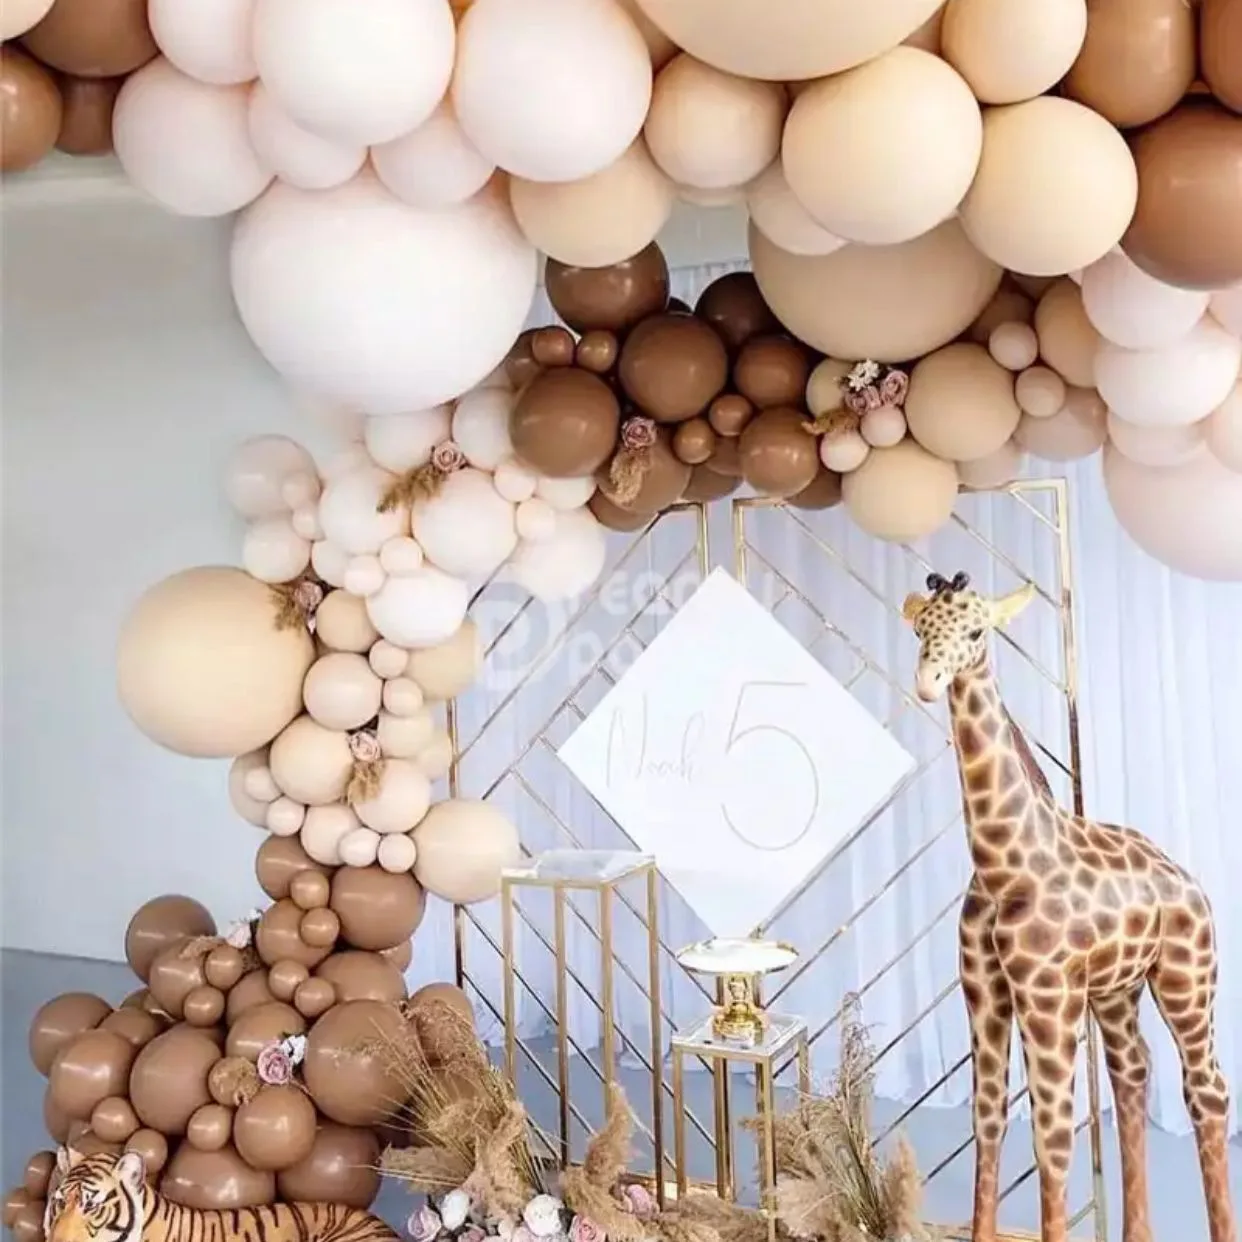 
Wholesale 6 Style Coffee Brown Baby Shower Balloons Arch Kit Skin Color Latex Garland Baby Shower Supplies Backdrop 